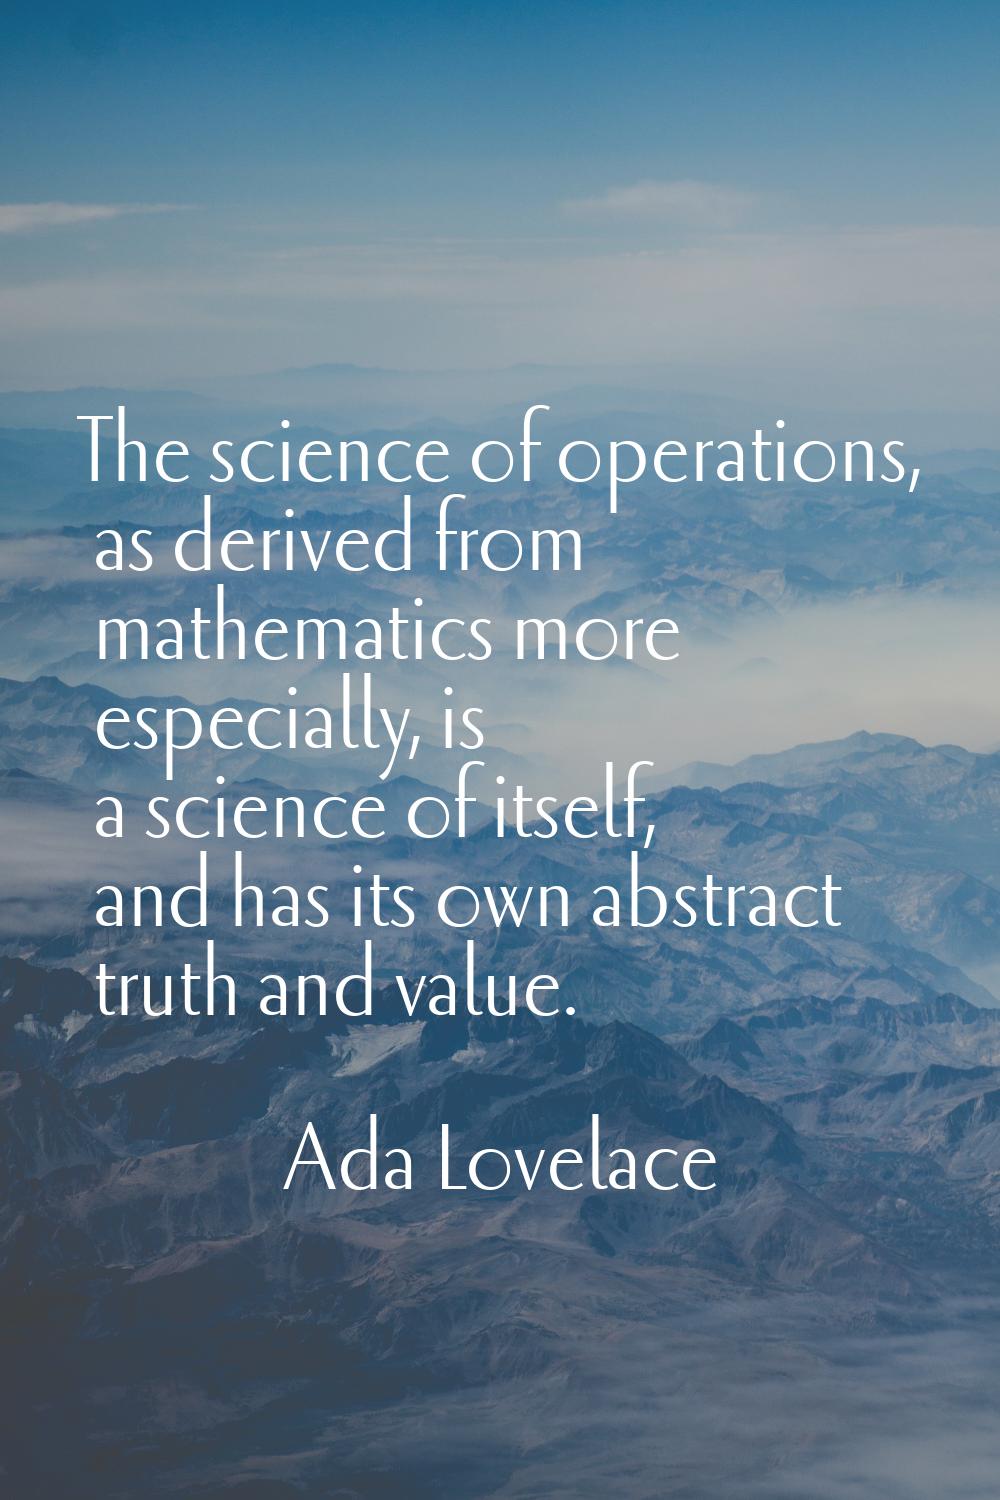 The science of operations, as derived from mathematics more especially, is a science of itself, and